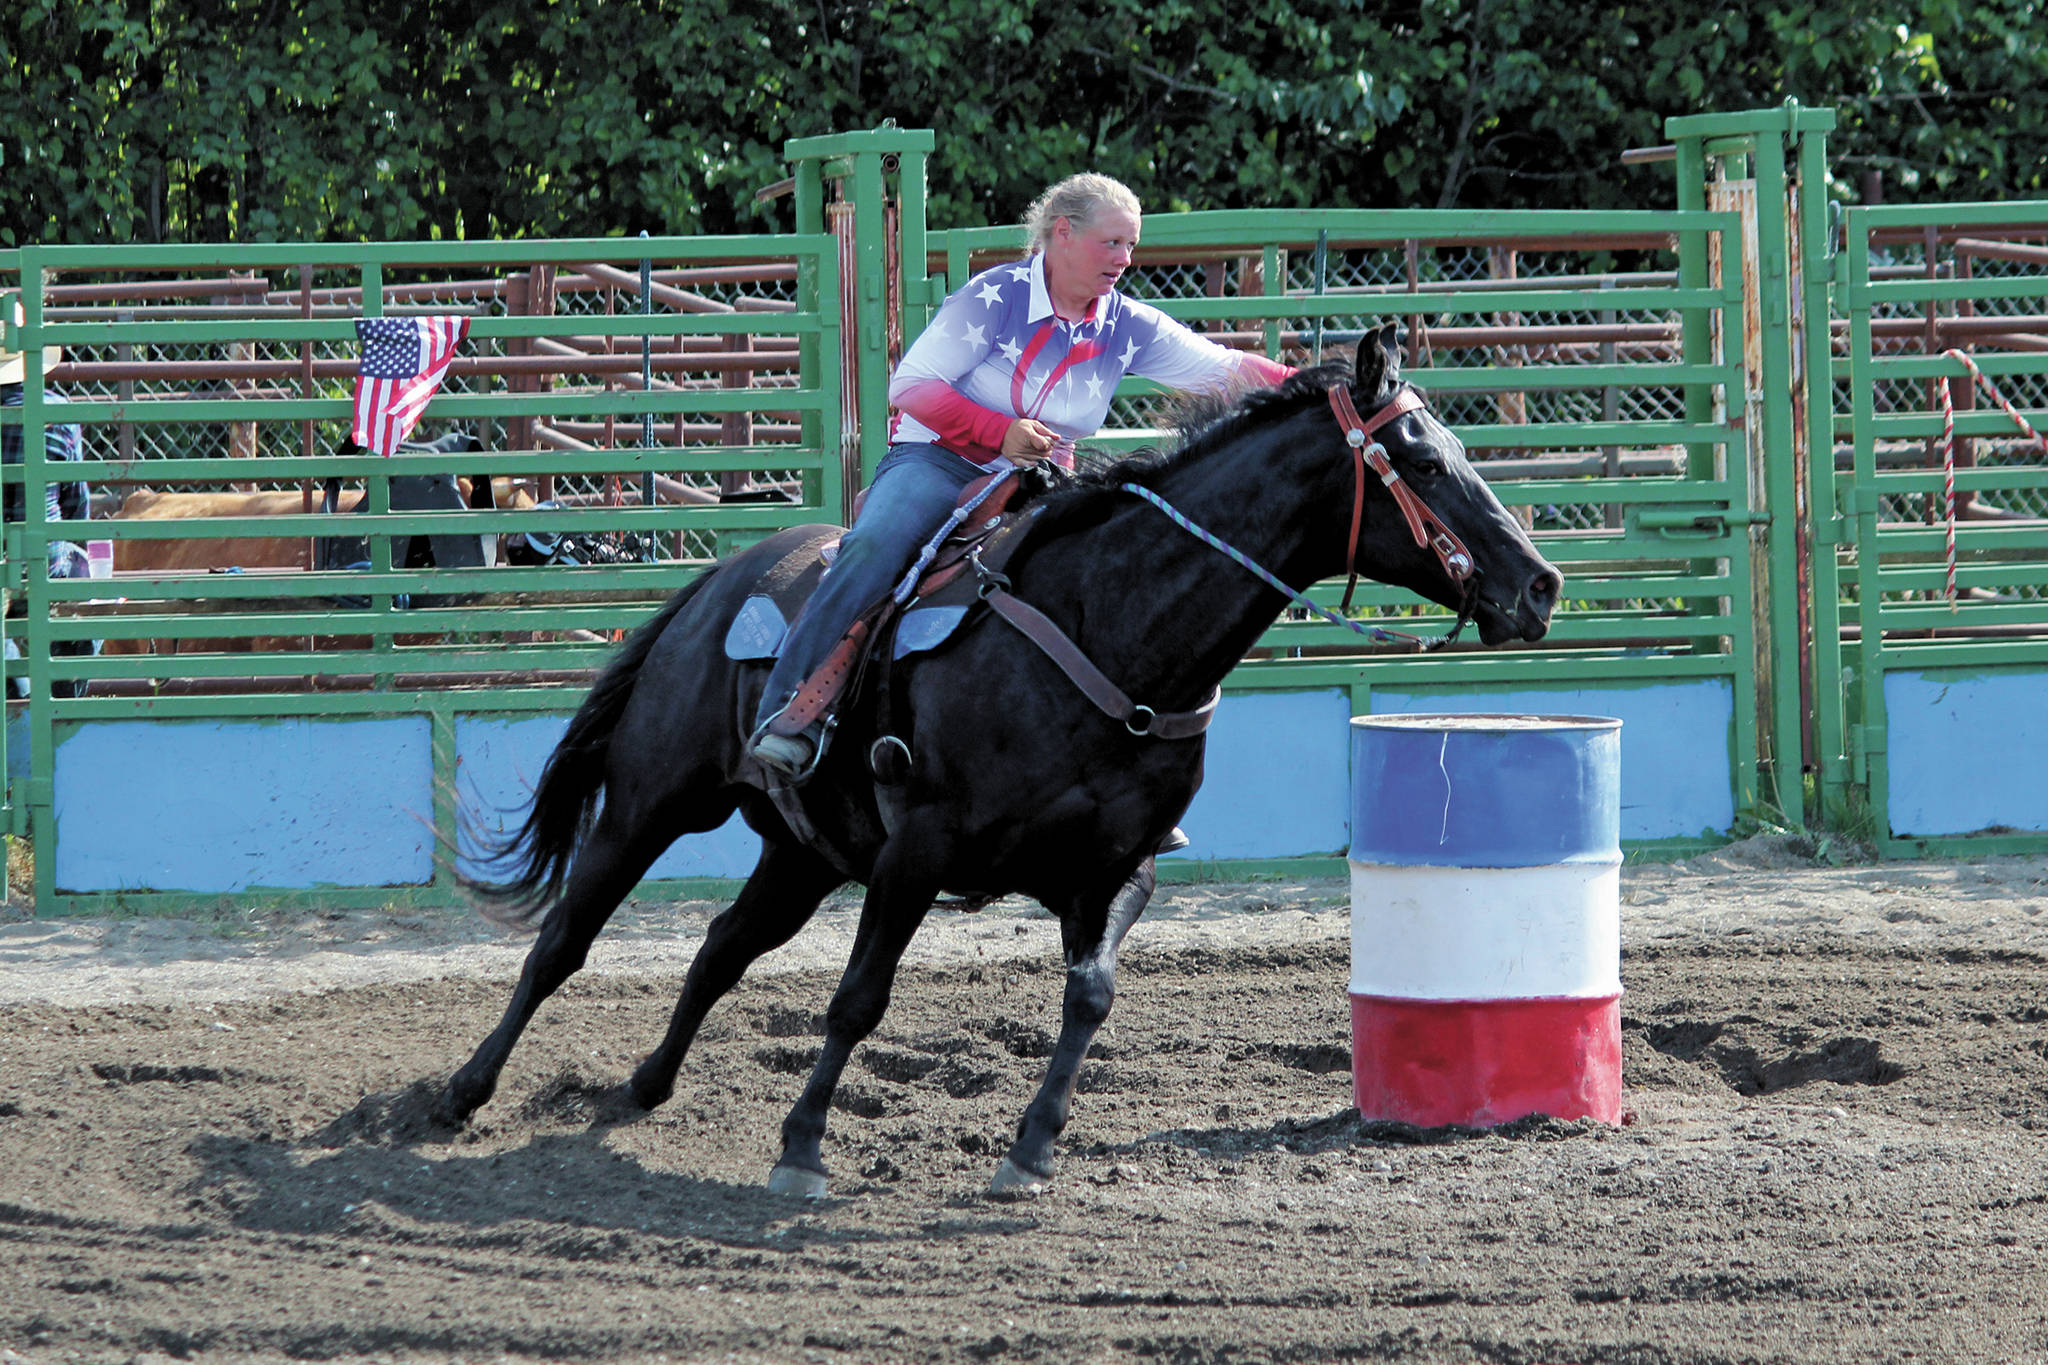 Katy Jones, of the Homer area, rides her horse Bo through a barrel race Saturday, July 4, 2020 during the Ninilchik Rodeo at the Kenai Peninsula Fairgrounds in Ninilchik, Alaska. (Photo by Megan Pacer/Homer News)